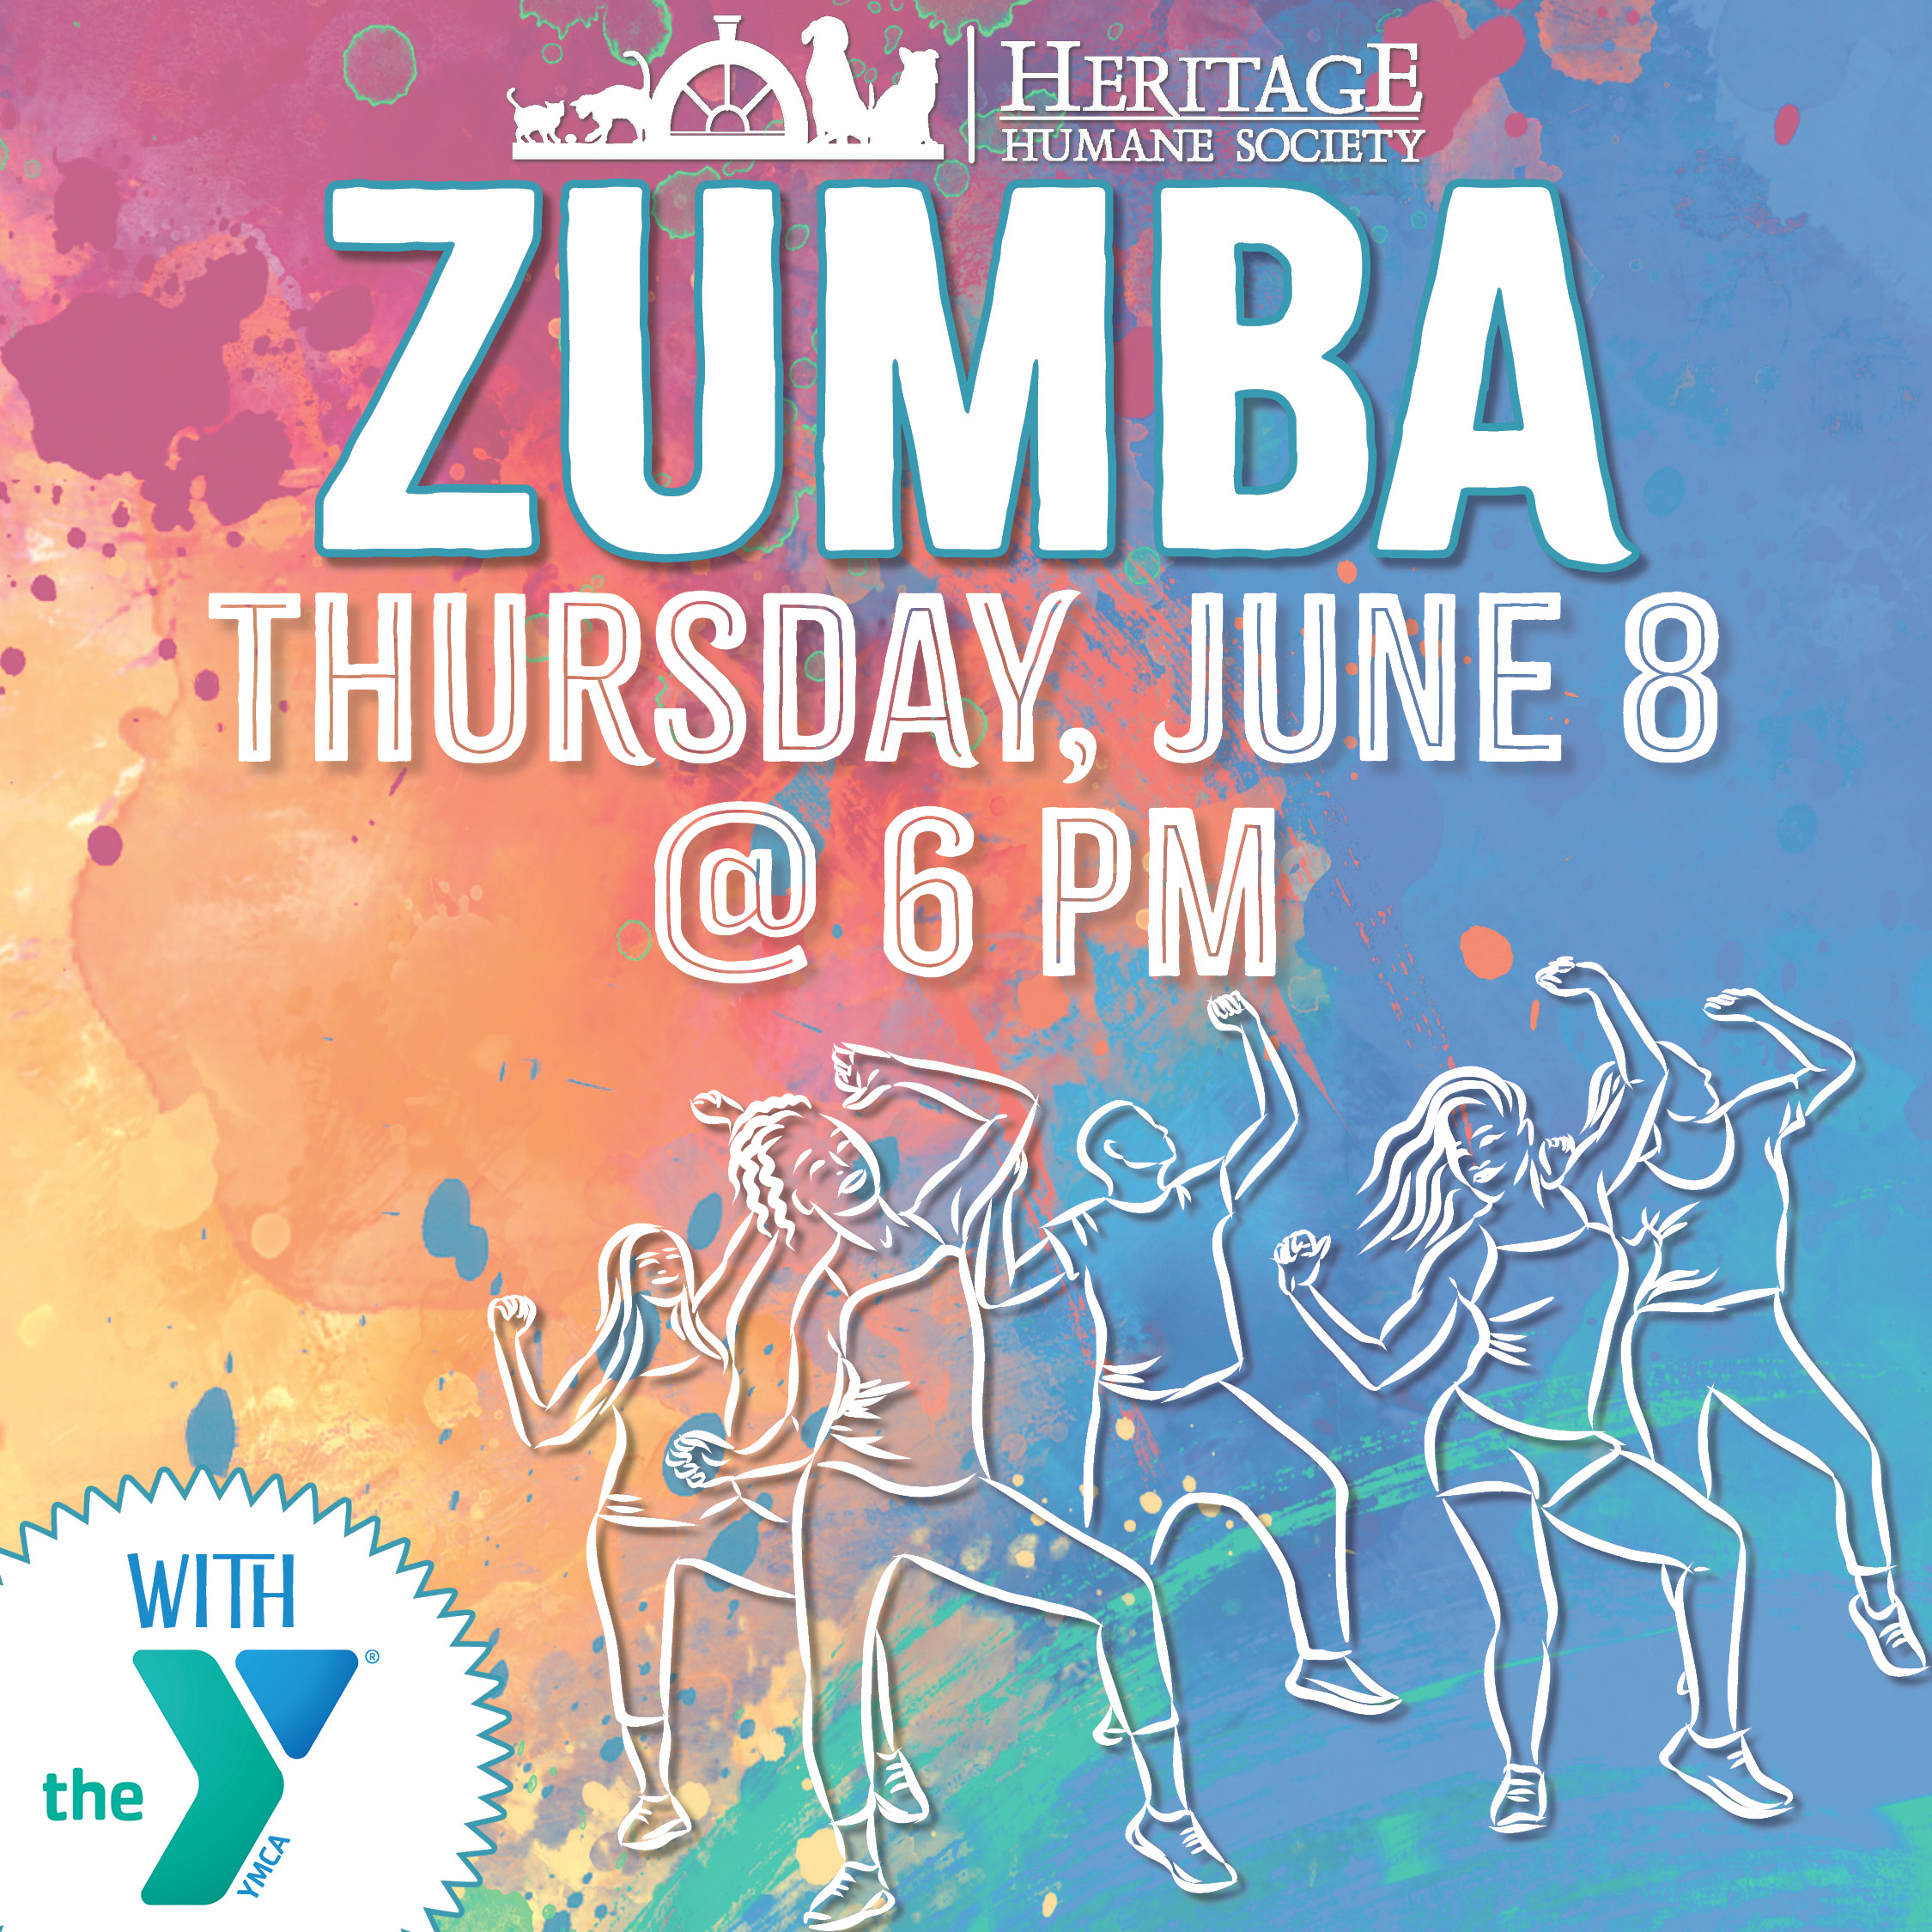 Let’s Zumba!